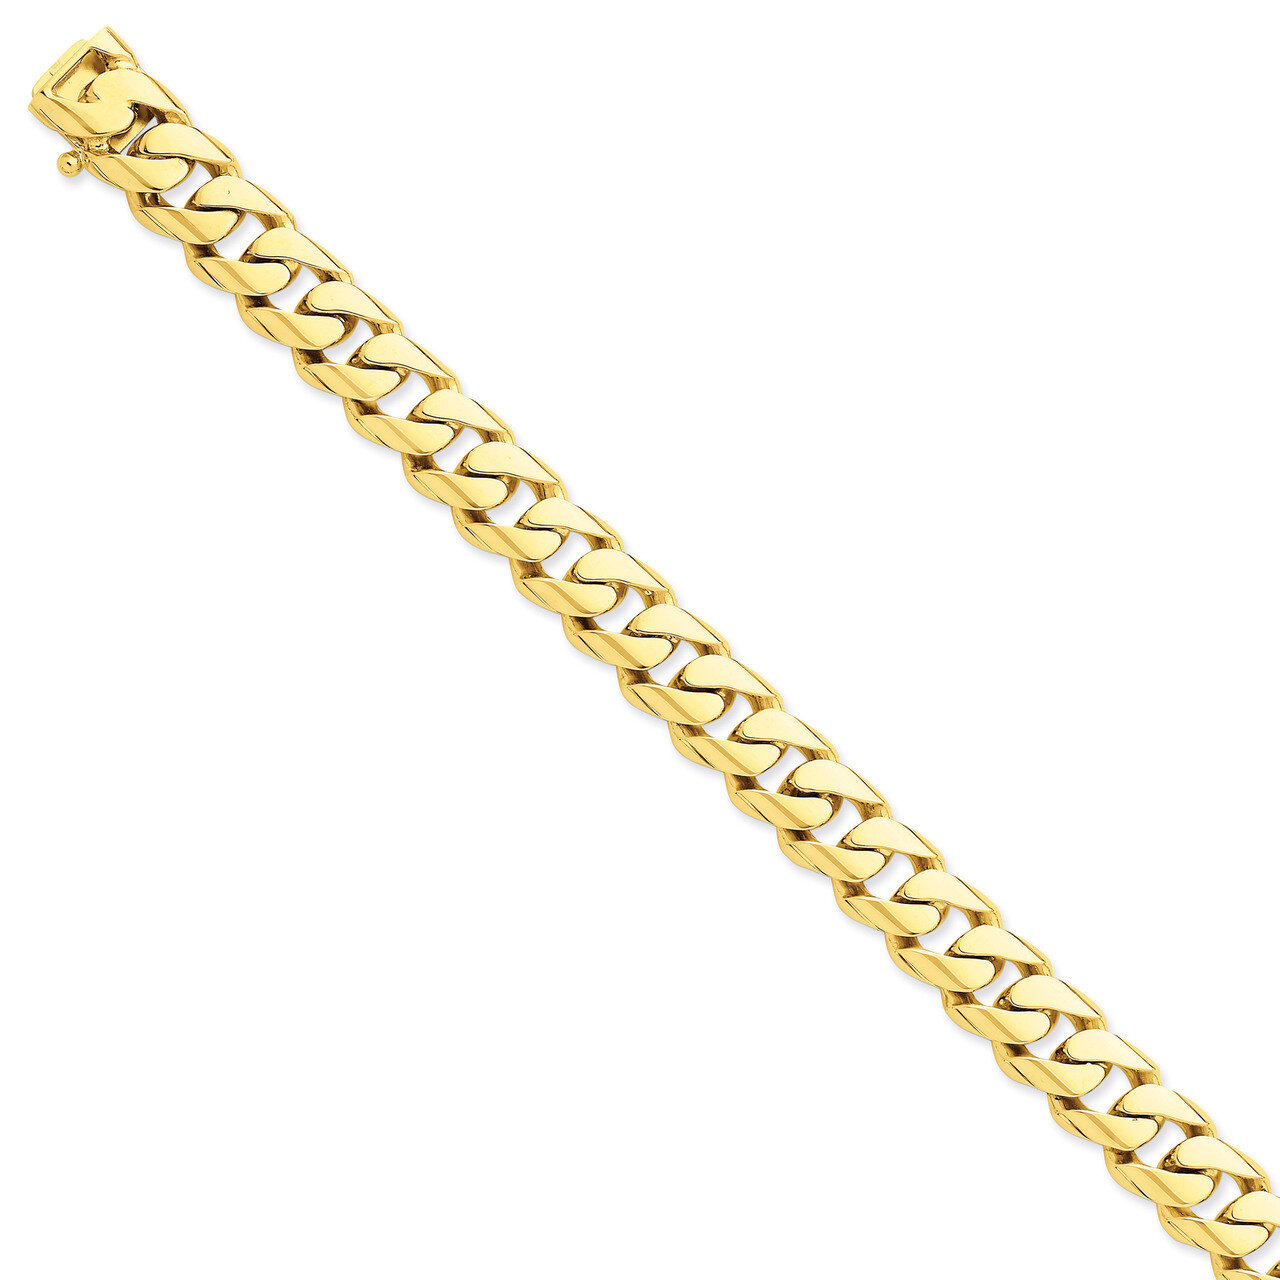 Hand Polished Rounded Curb Chain 20 Inch 14k Gold LK127-20